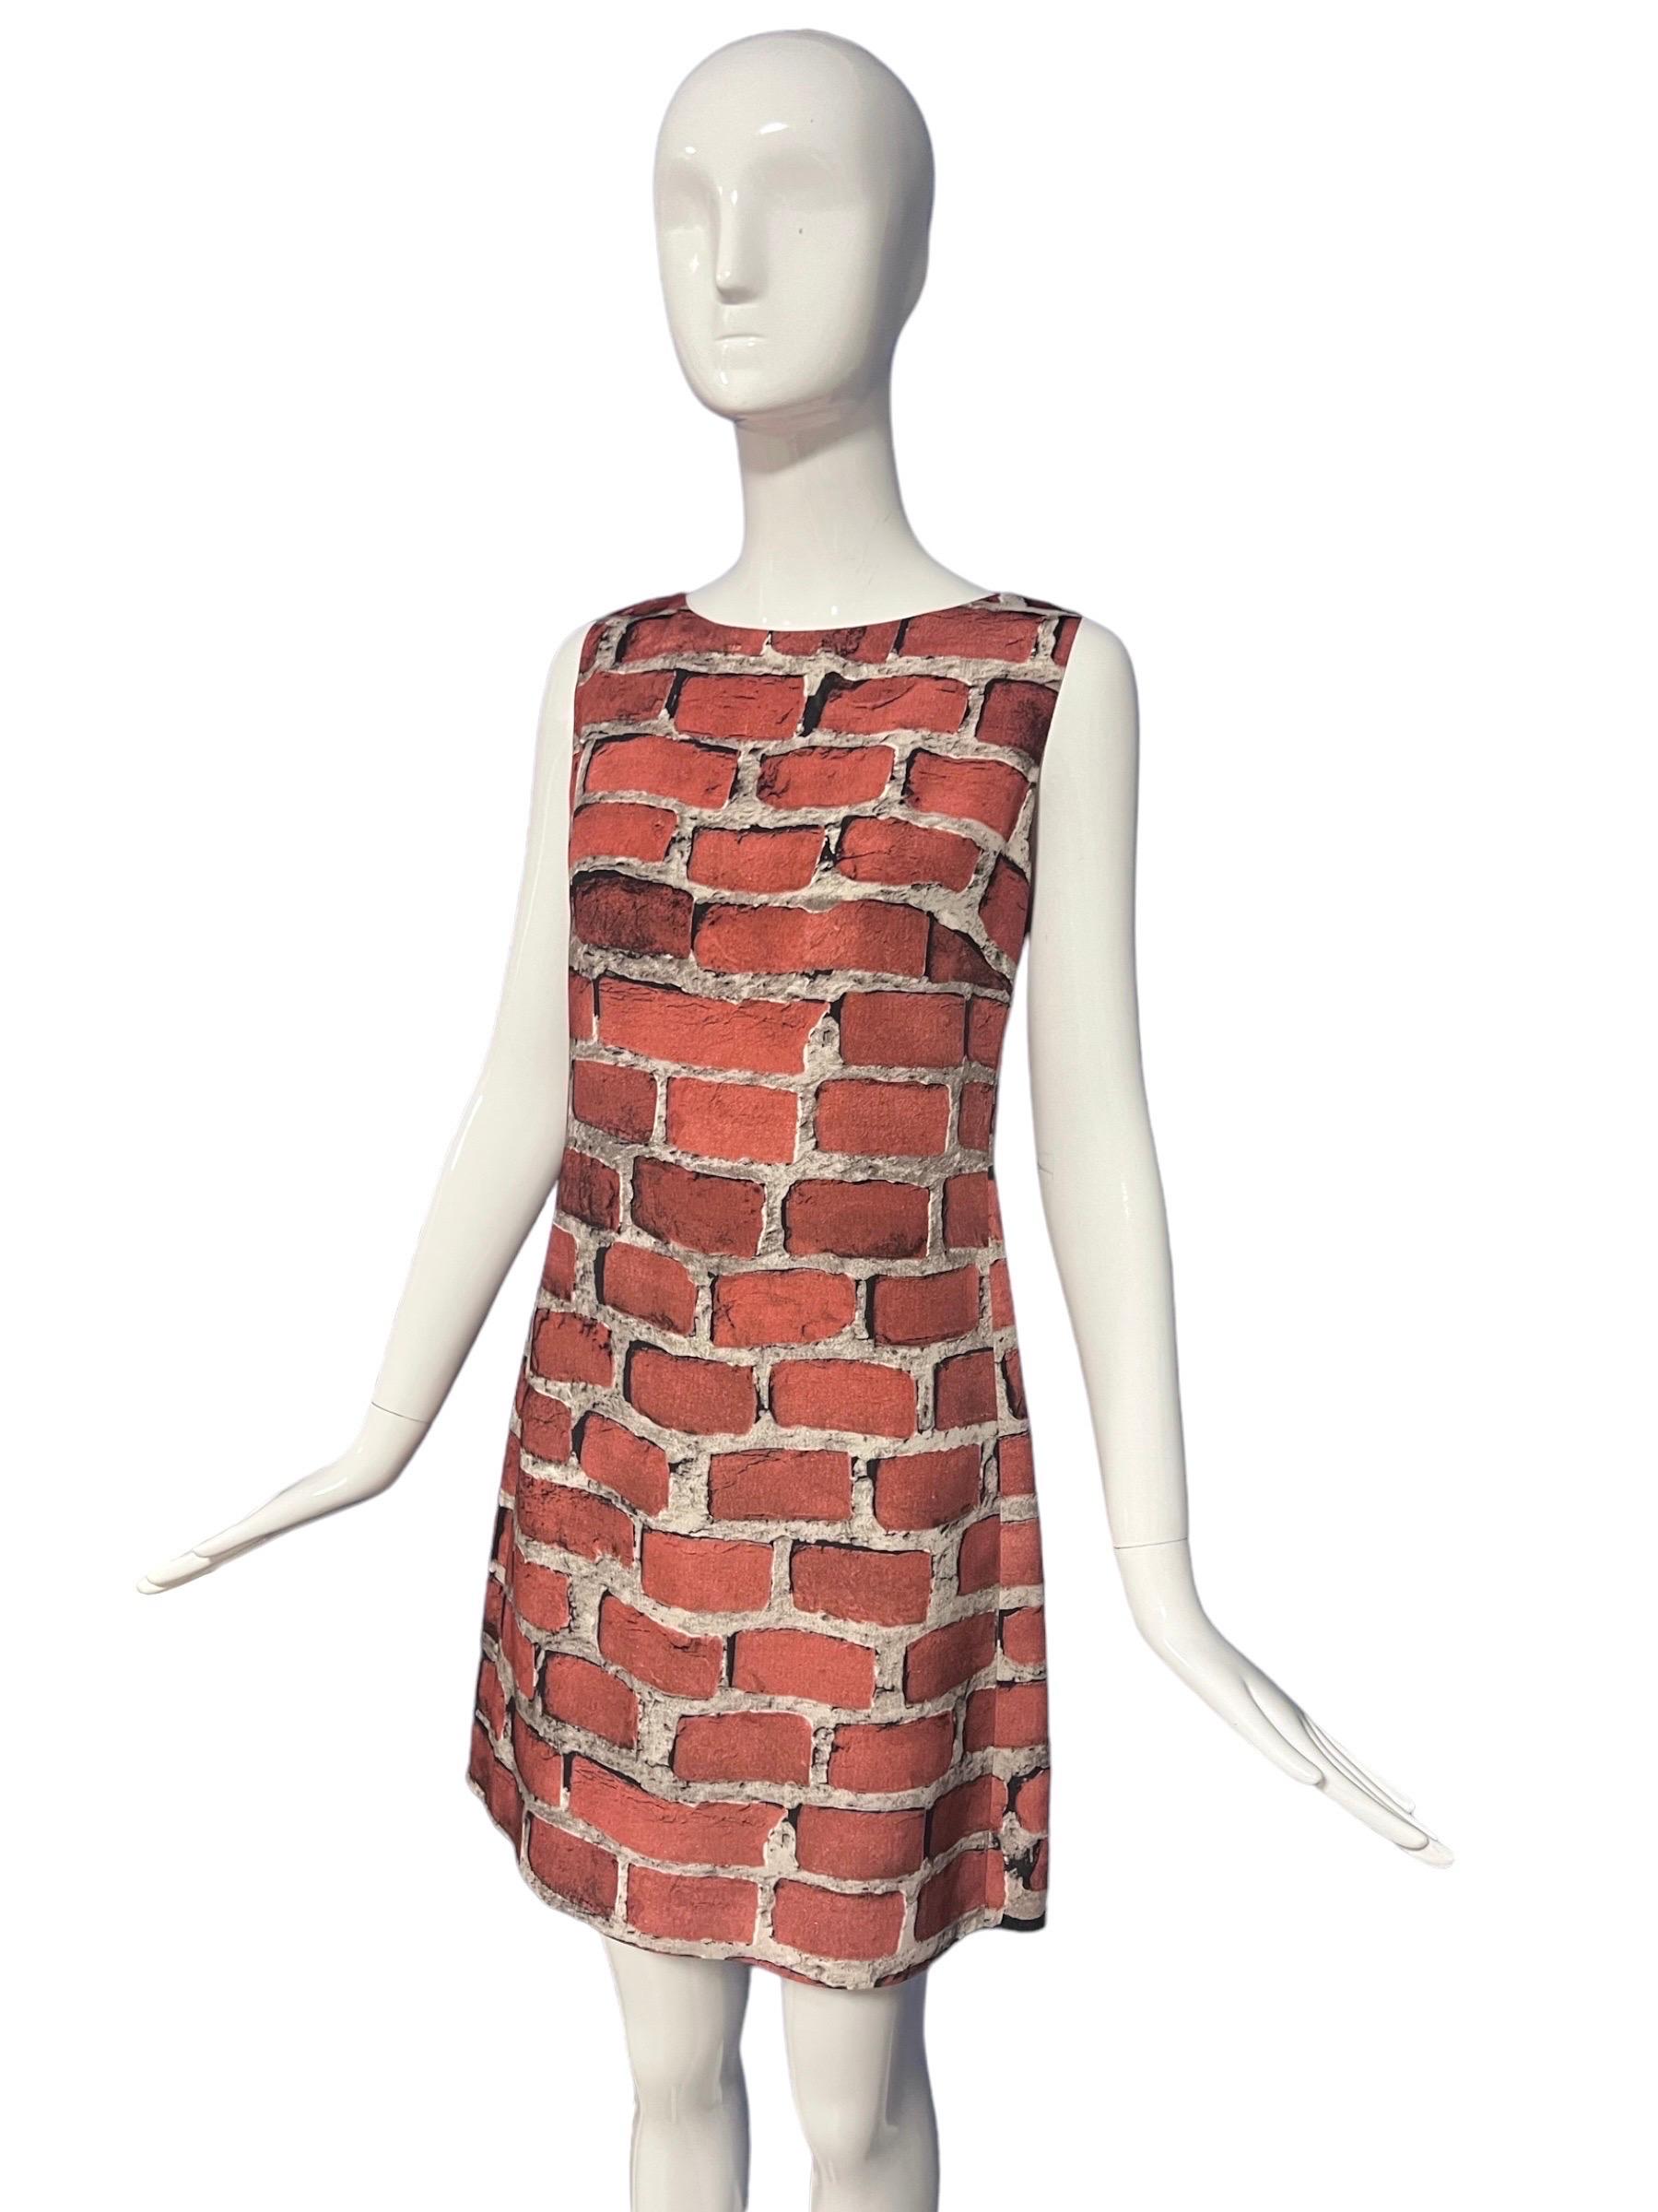 Women's 1990’s Moschino Couture Vintage Brick Printed Dress For Sale